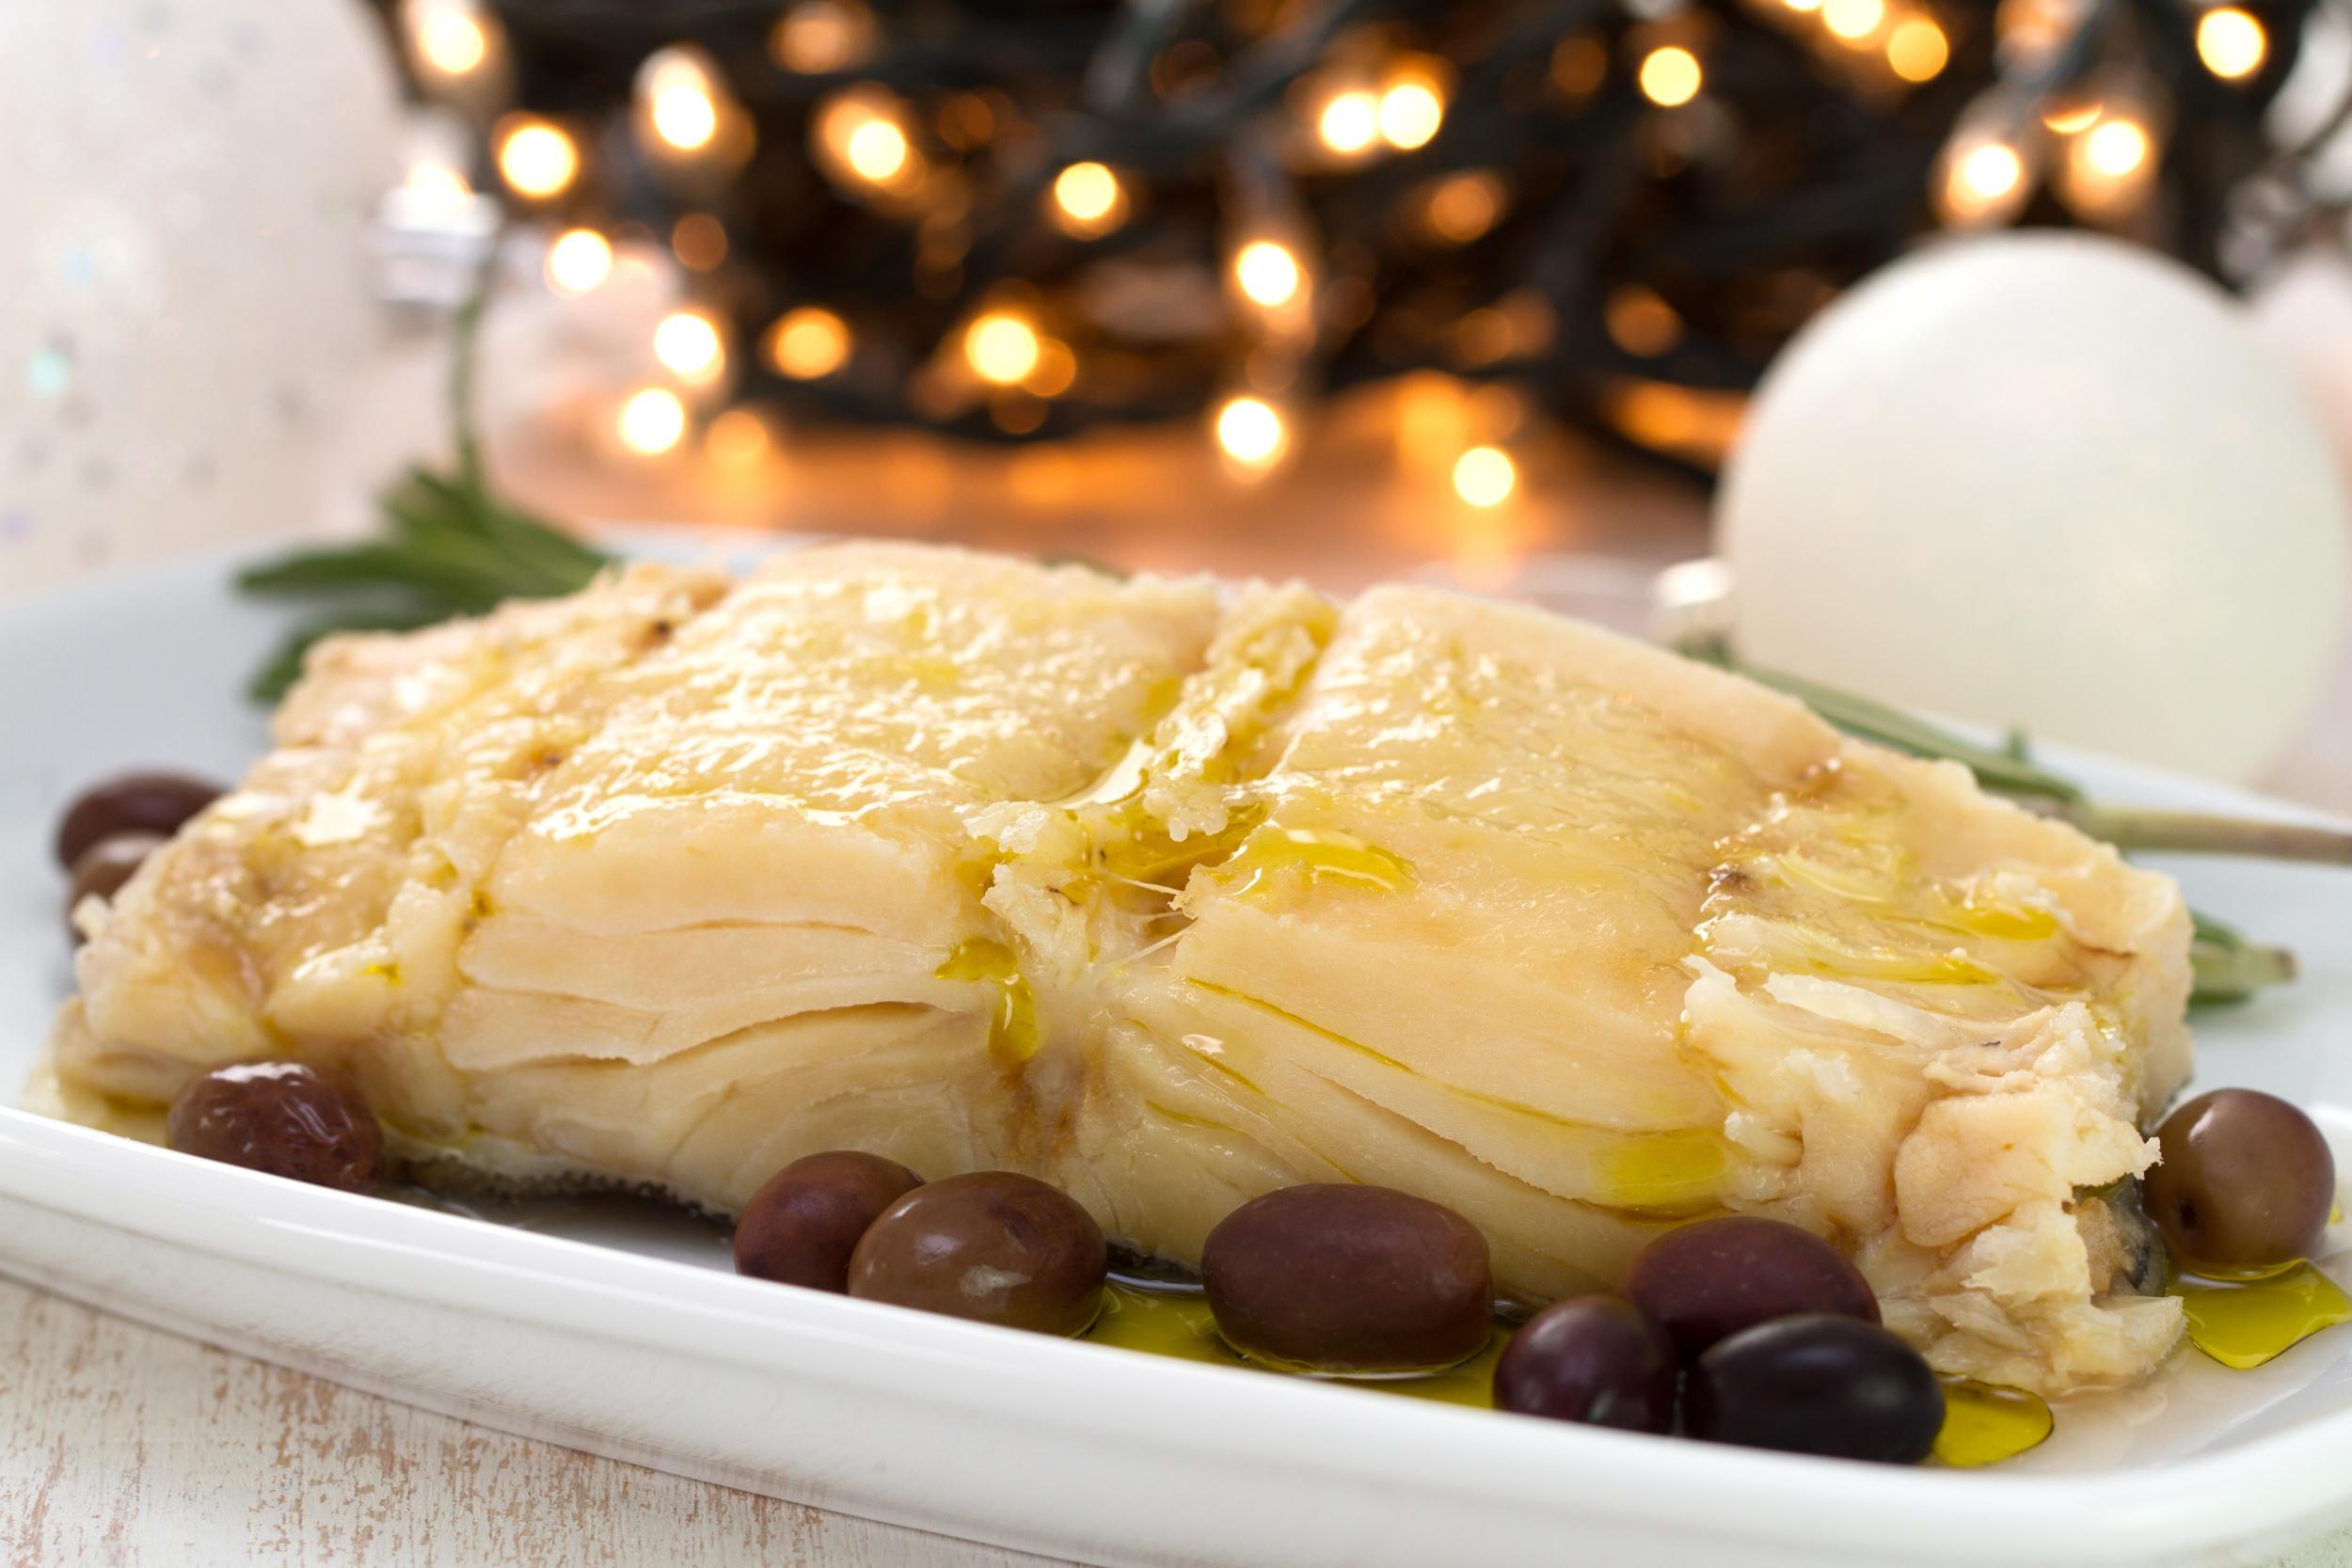 Christmas dinner in Portugal usually features cod and potatoes